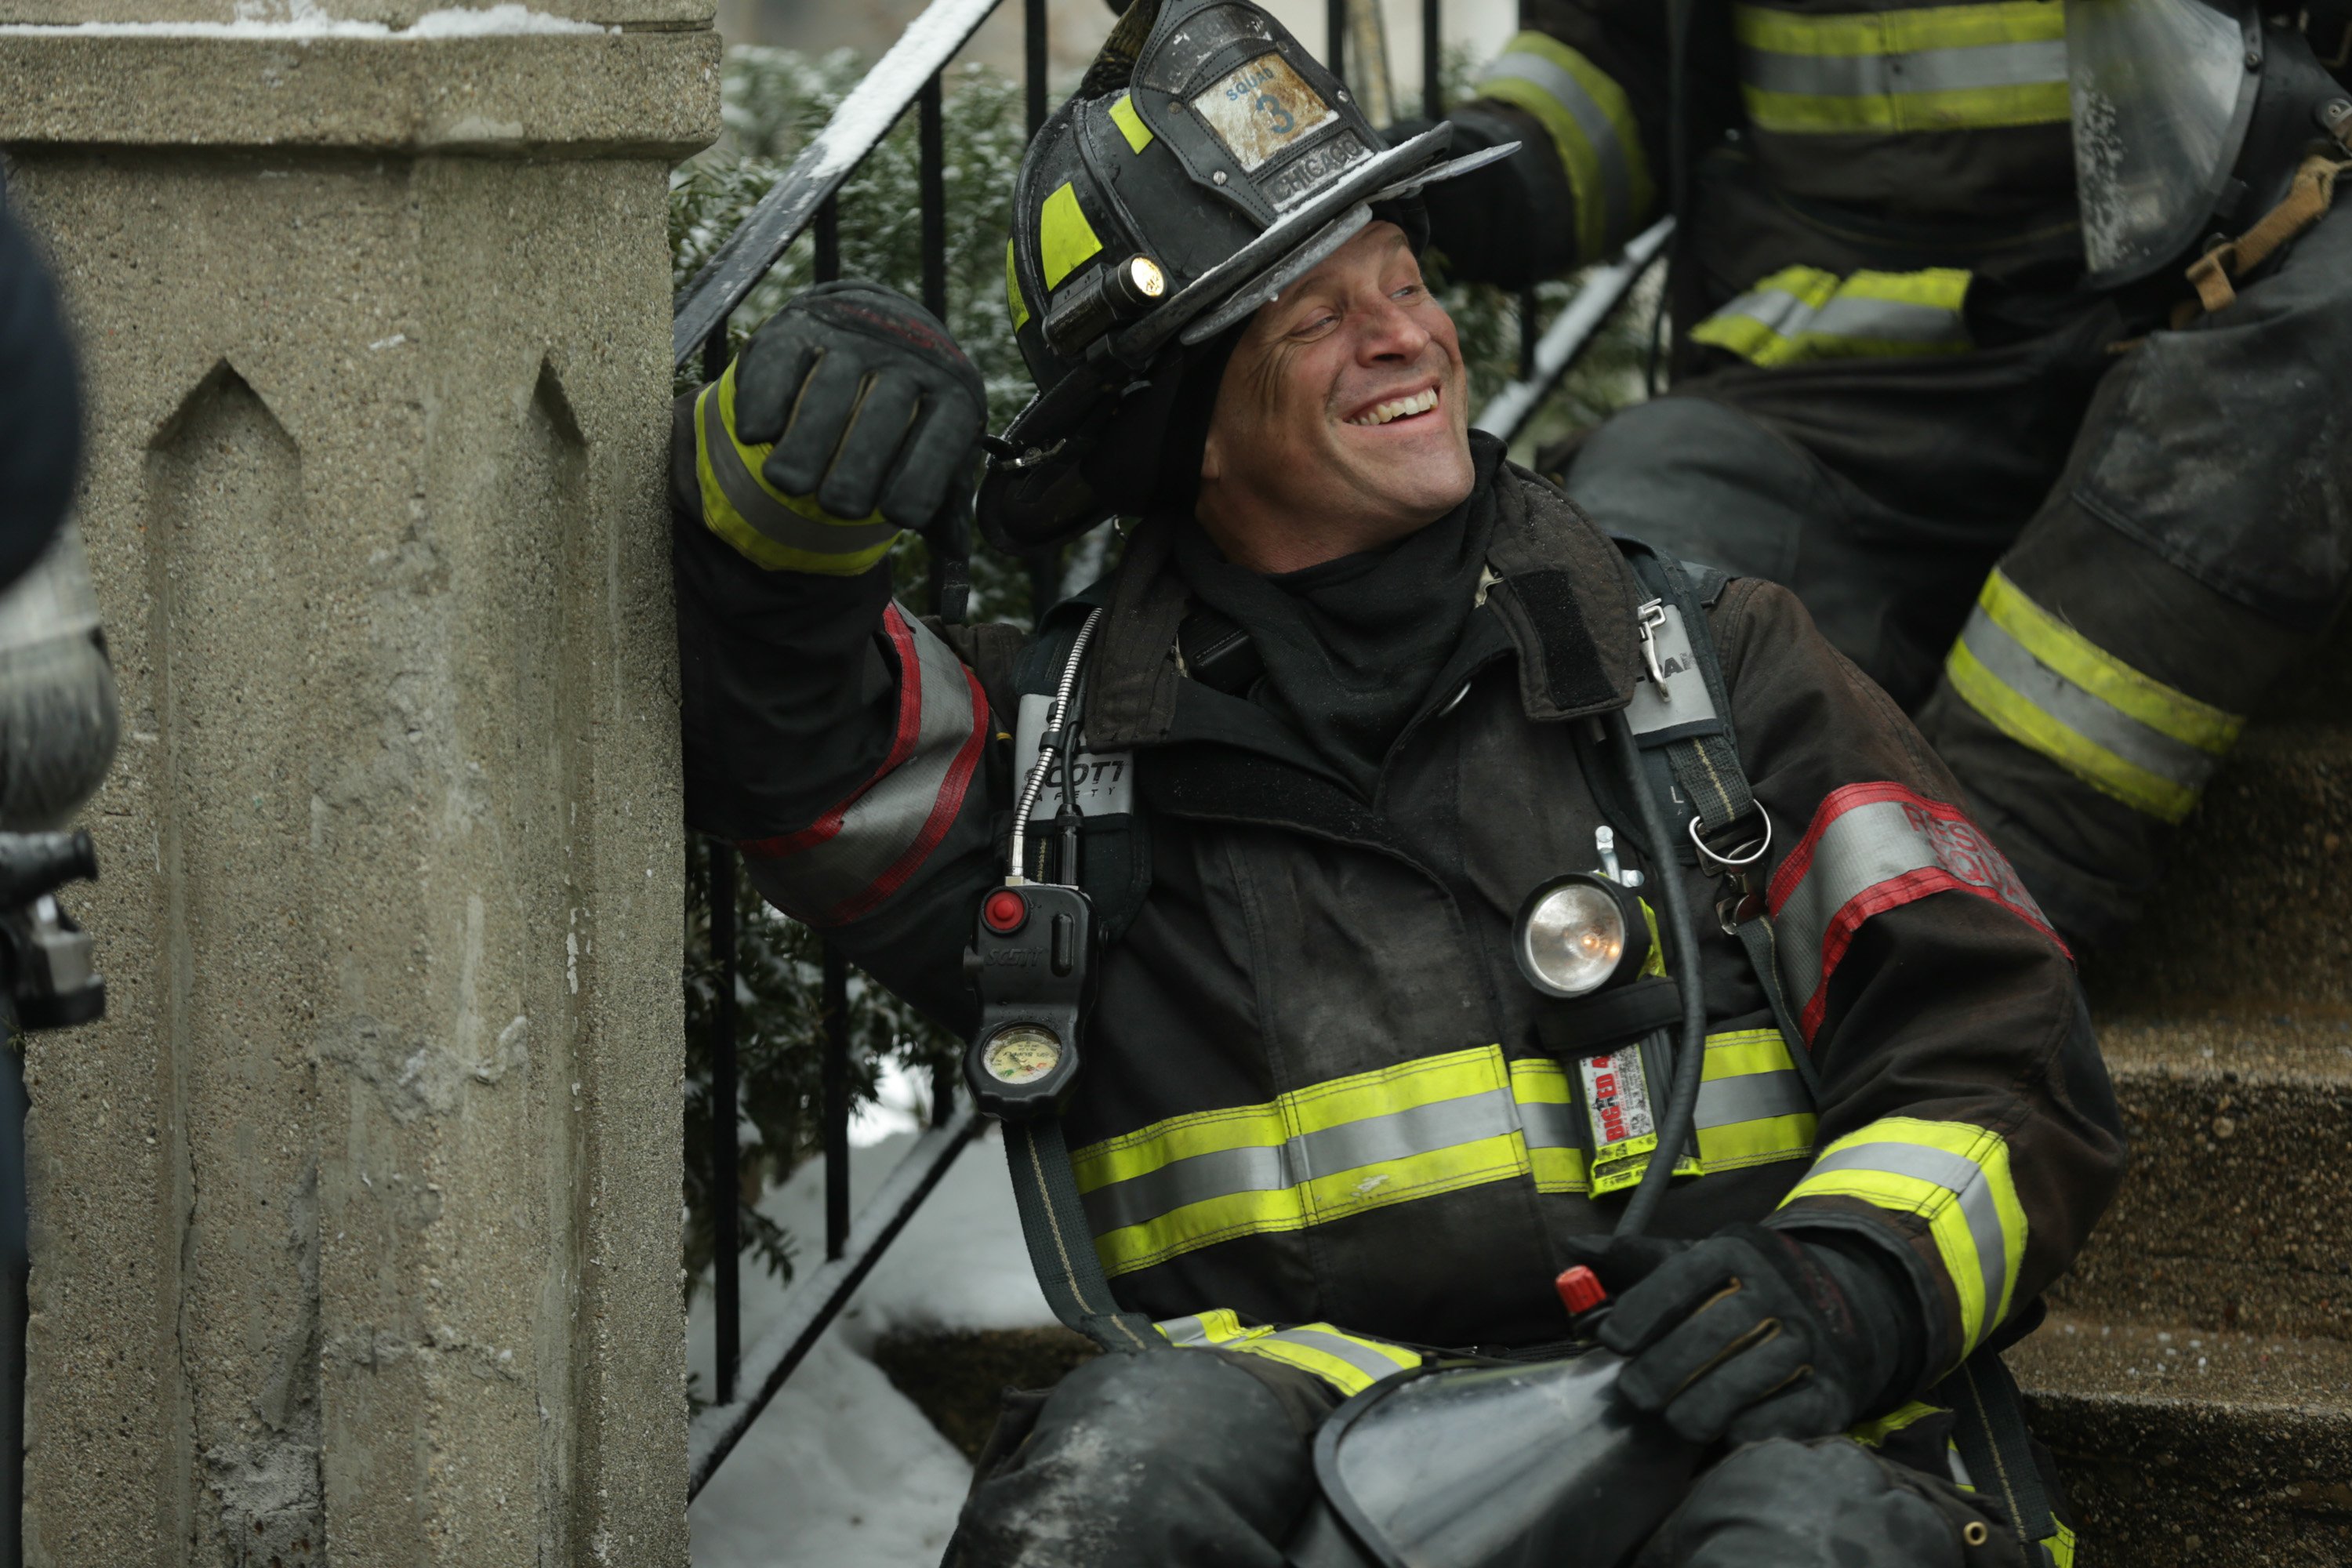 Capp sits on the stairs in his fireman gear smiling. Randy Flagler reveals Capp's secret talent in Chicago Fire Season 10 Episode 12.